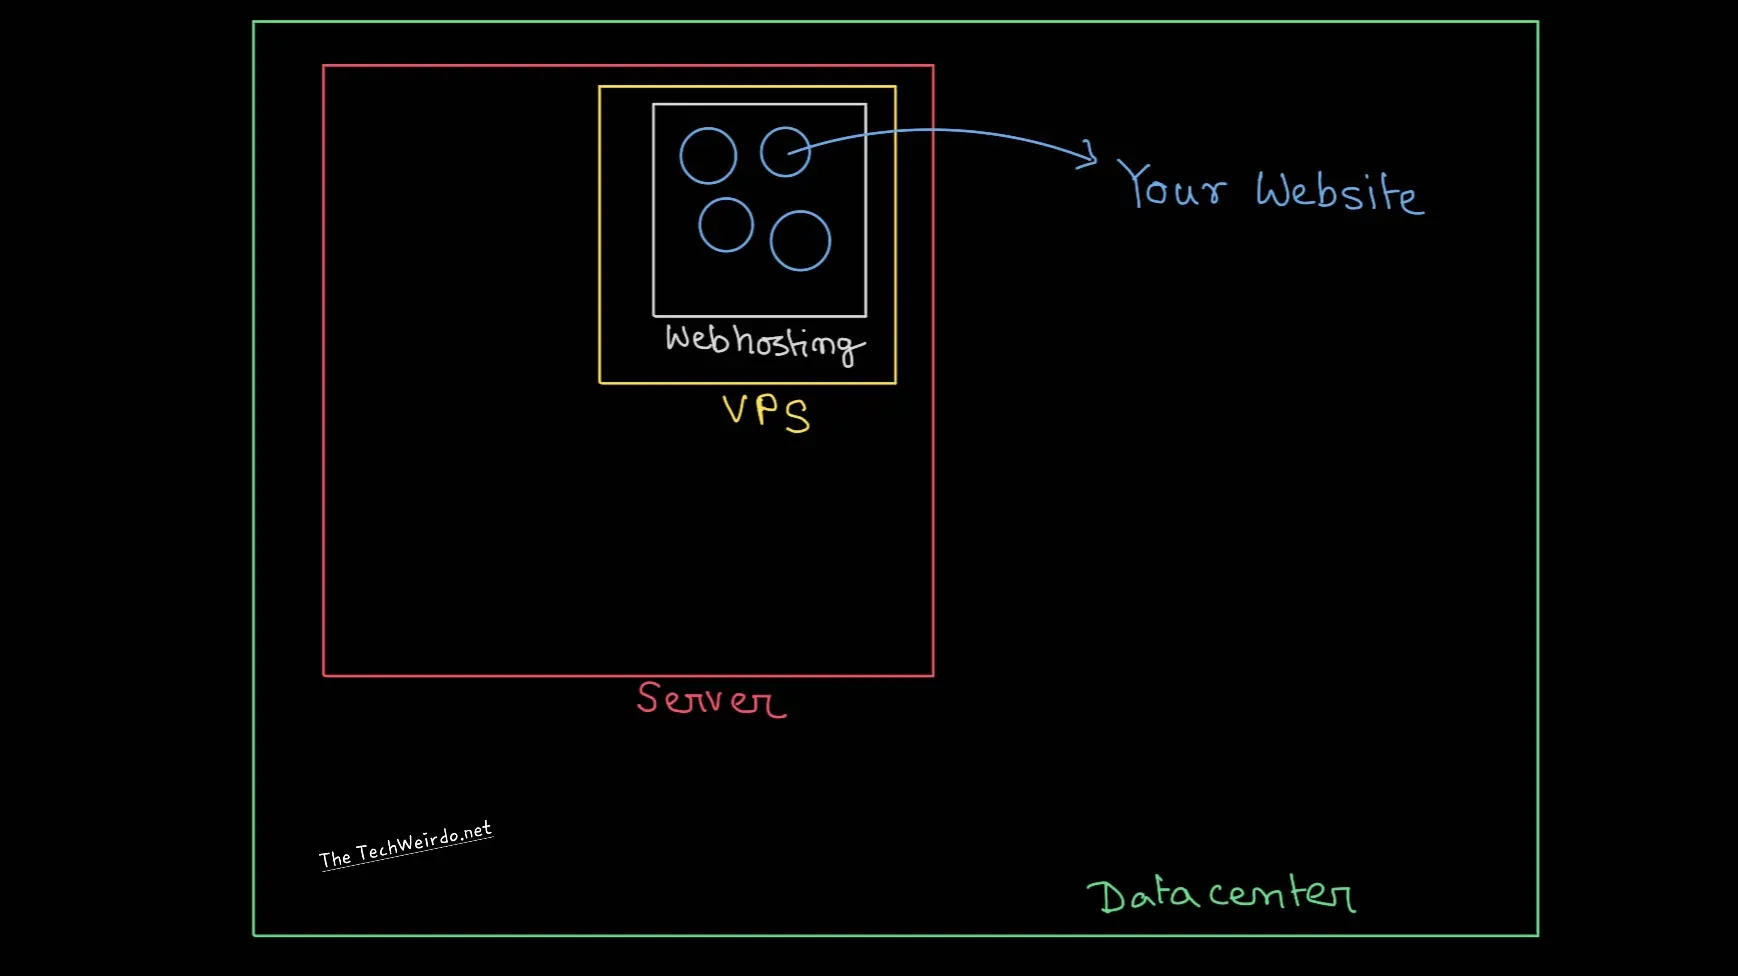 A high level diagram to show the relation between Webhostings at the bottom and datacentre at the top